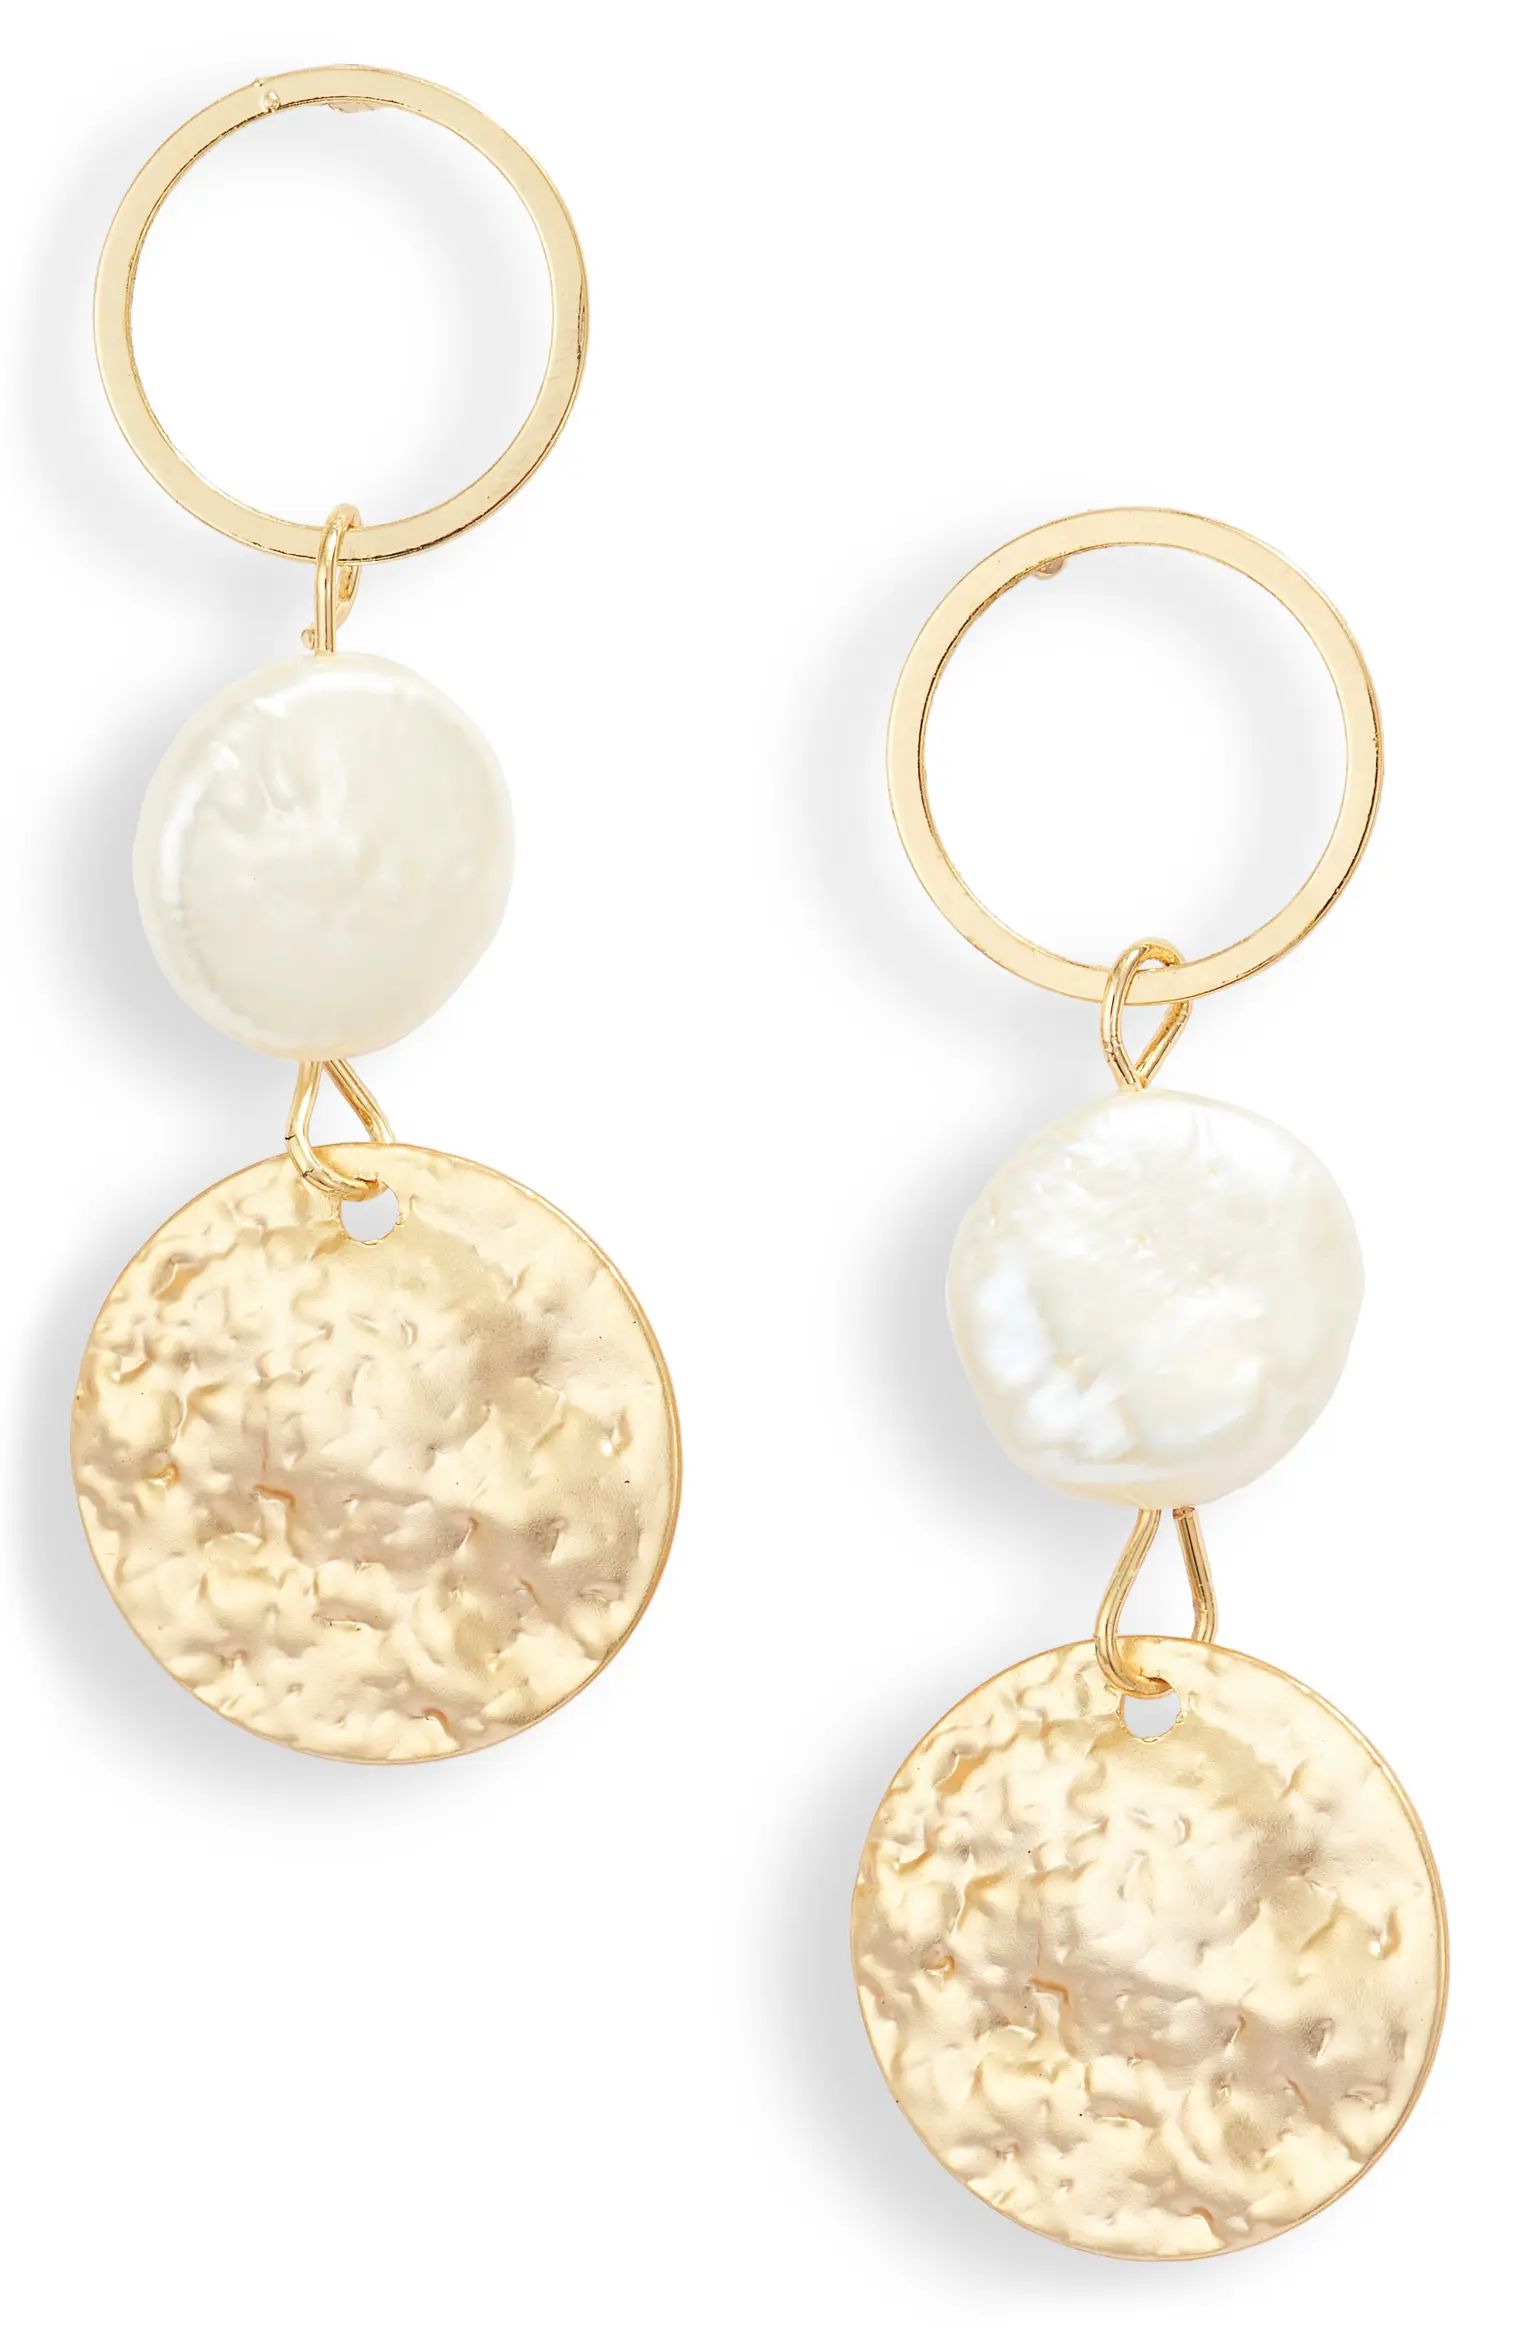 Imitation Coin Pearl Drop Earrings | Nordstrom